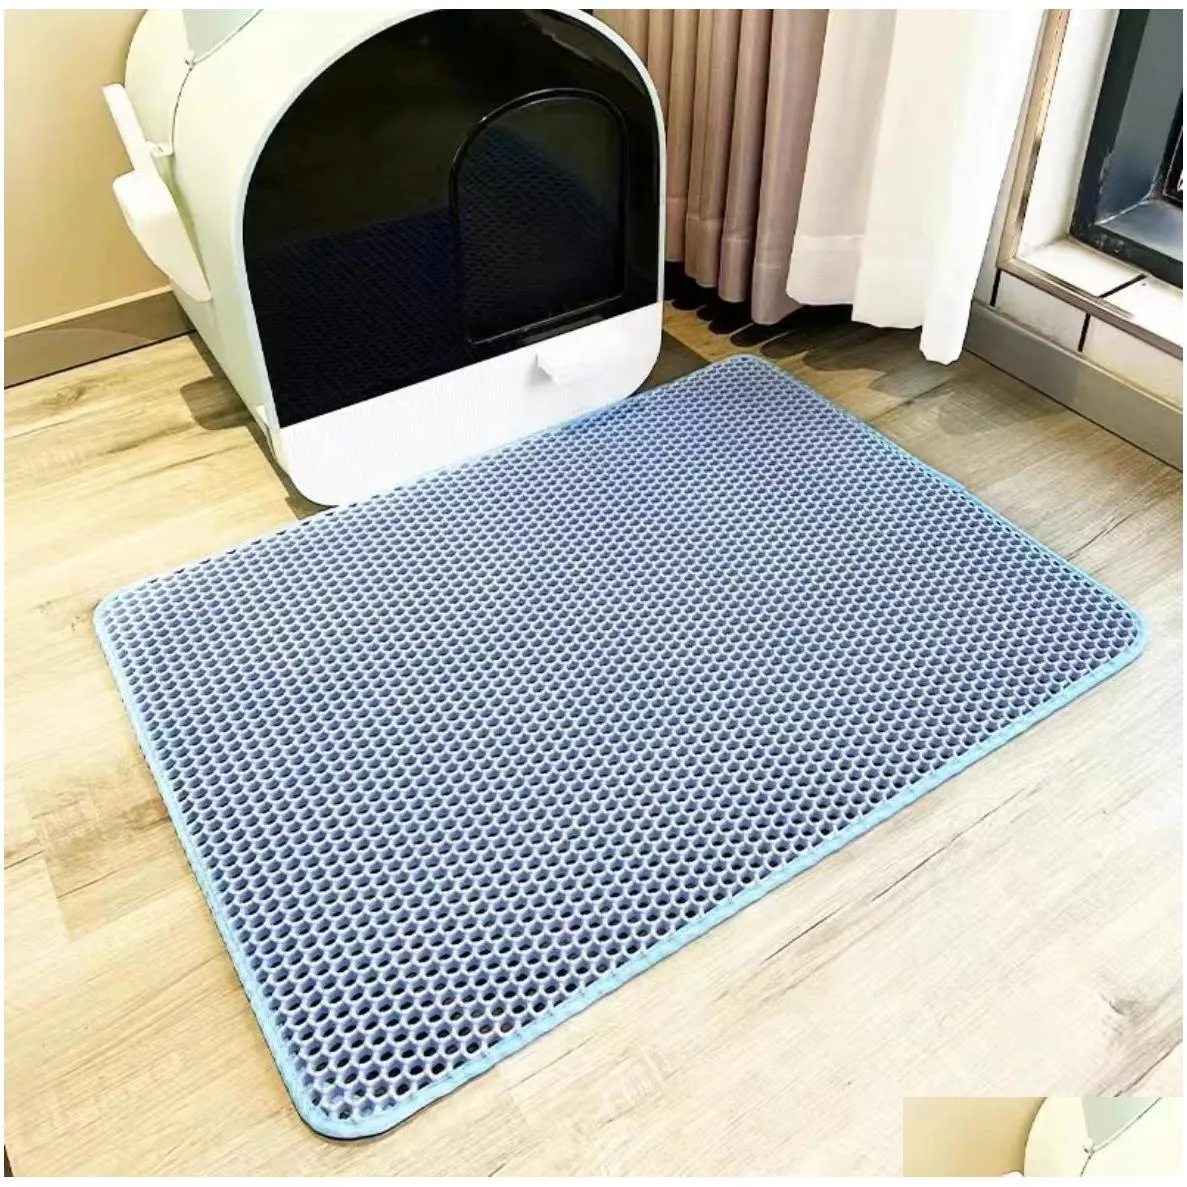 fold double layer pet litter box mat waterproof filters pads nonslip keep bed house clean trapping kitten sand wholesale price